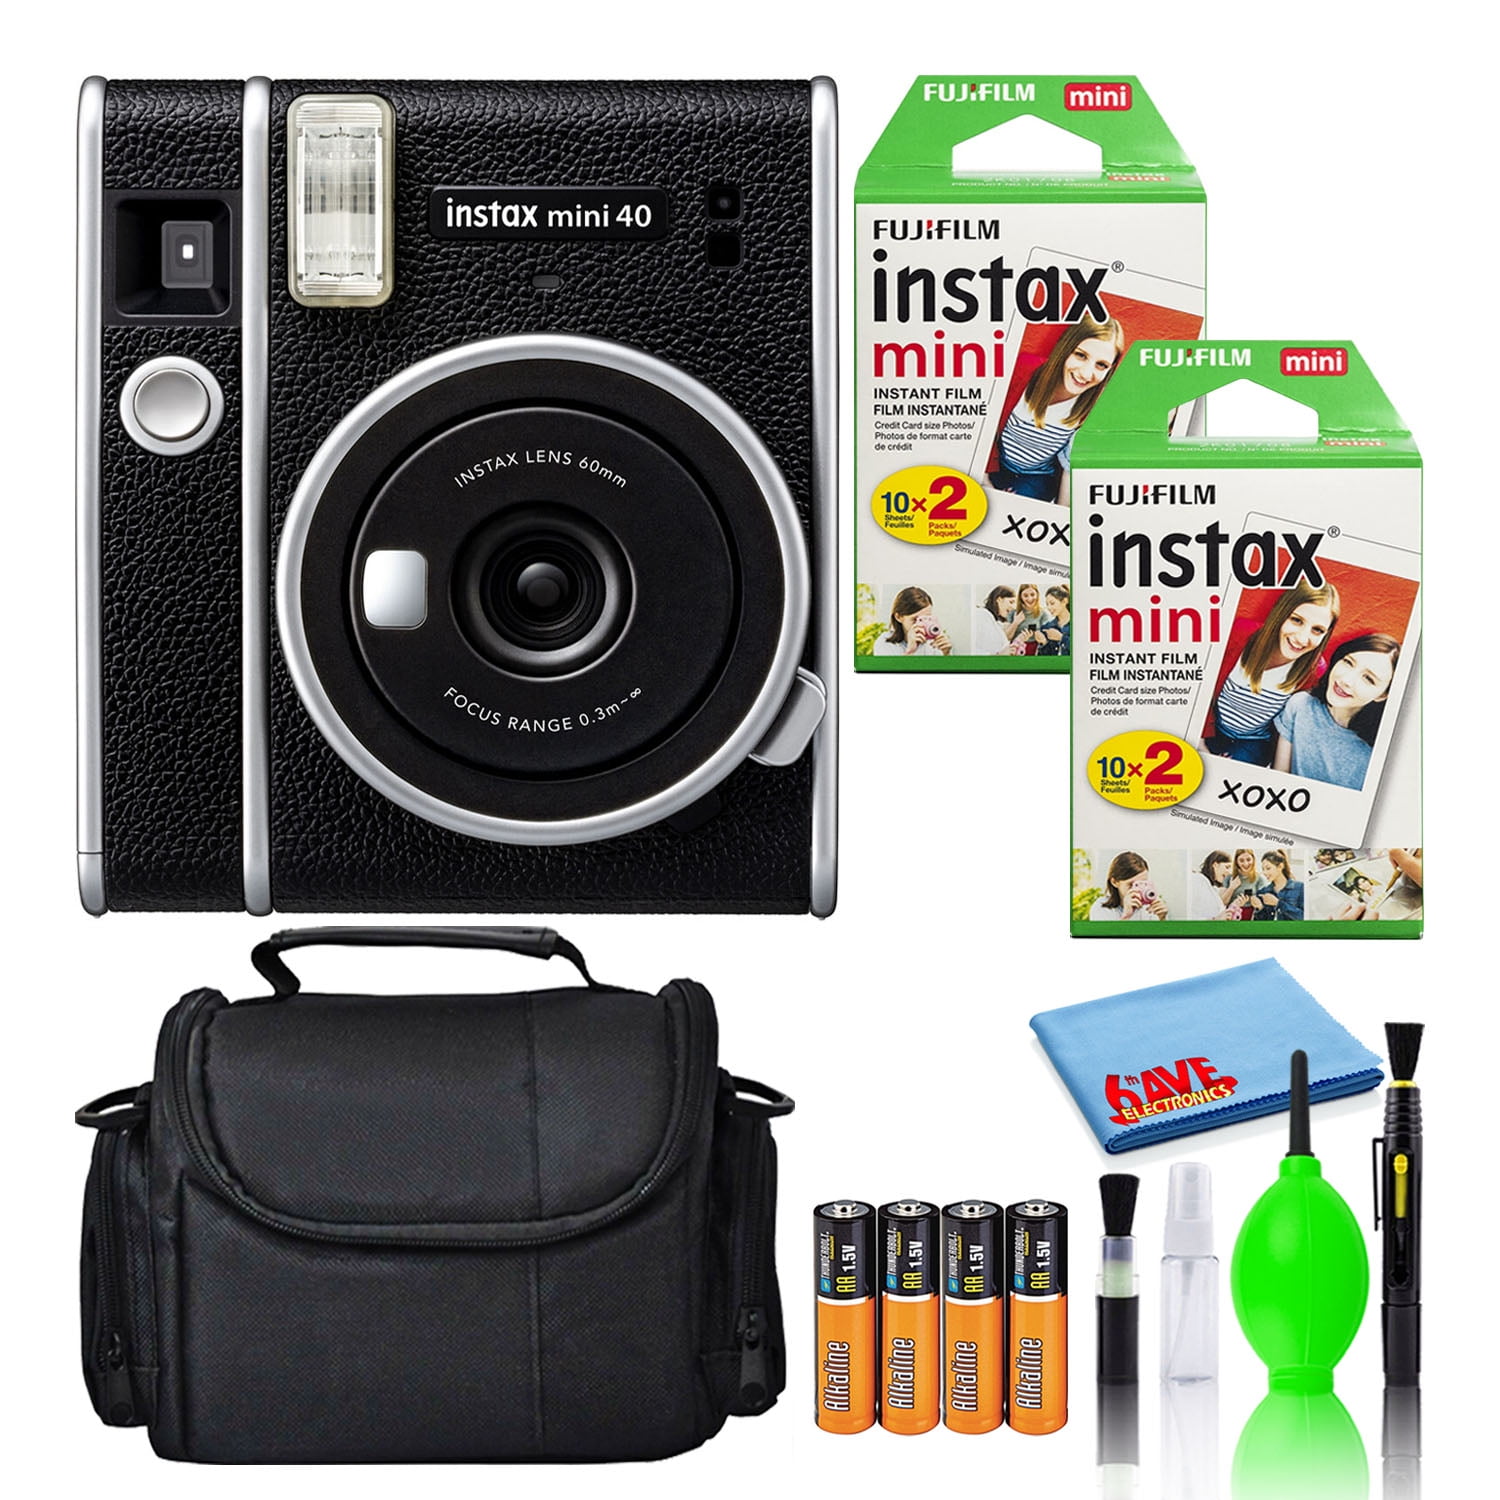 Fujifilm Instax Mini 40 Instant Film Camera (Black) Bundle with (40) Instax  Mini Instant Film Shots + Padded Carrying Bag + (4) Rechargeable Batteries  + Deluxe Cleaning Kit 